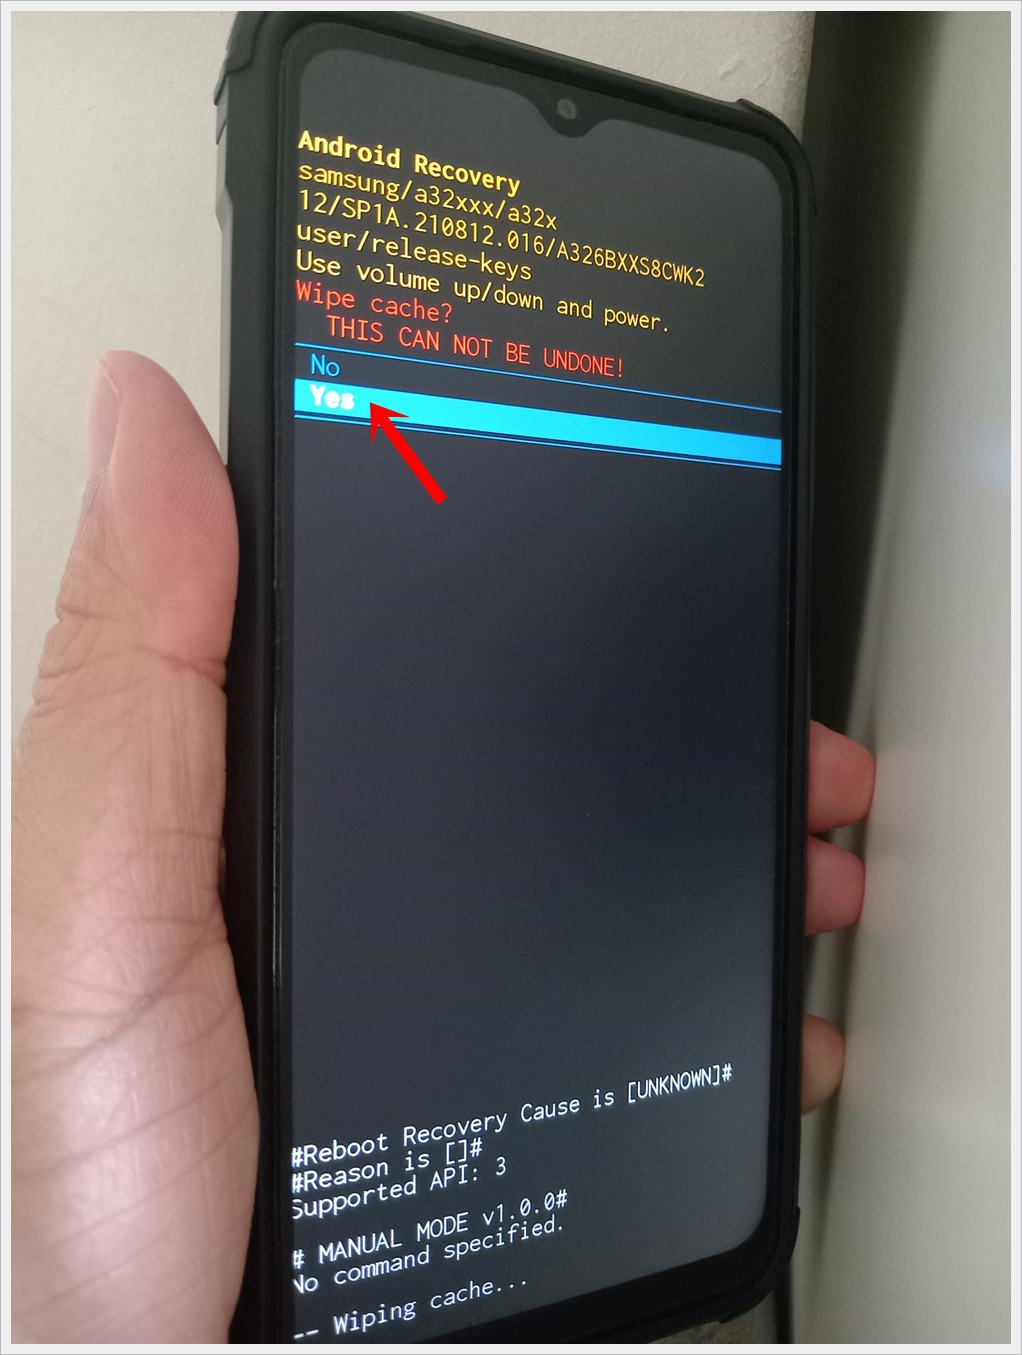 This photo shows a Samsung Galaxy phone displaying the 'Android Recovery' screen with the 'Yes' option highlighted to confirm wipe cache action.